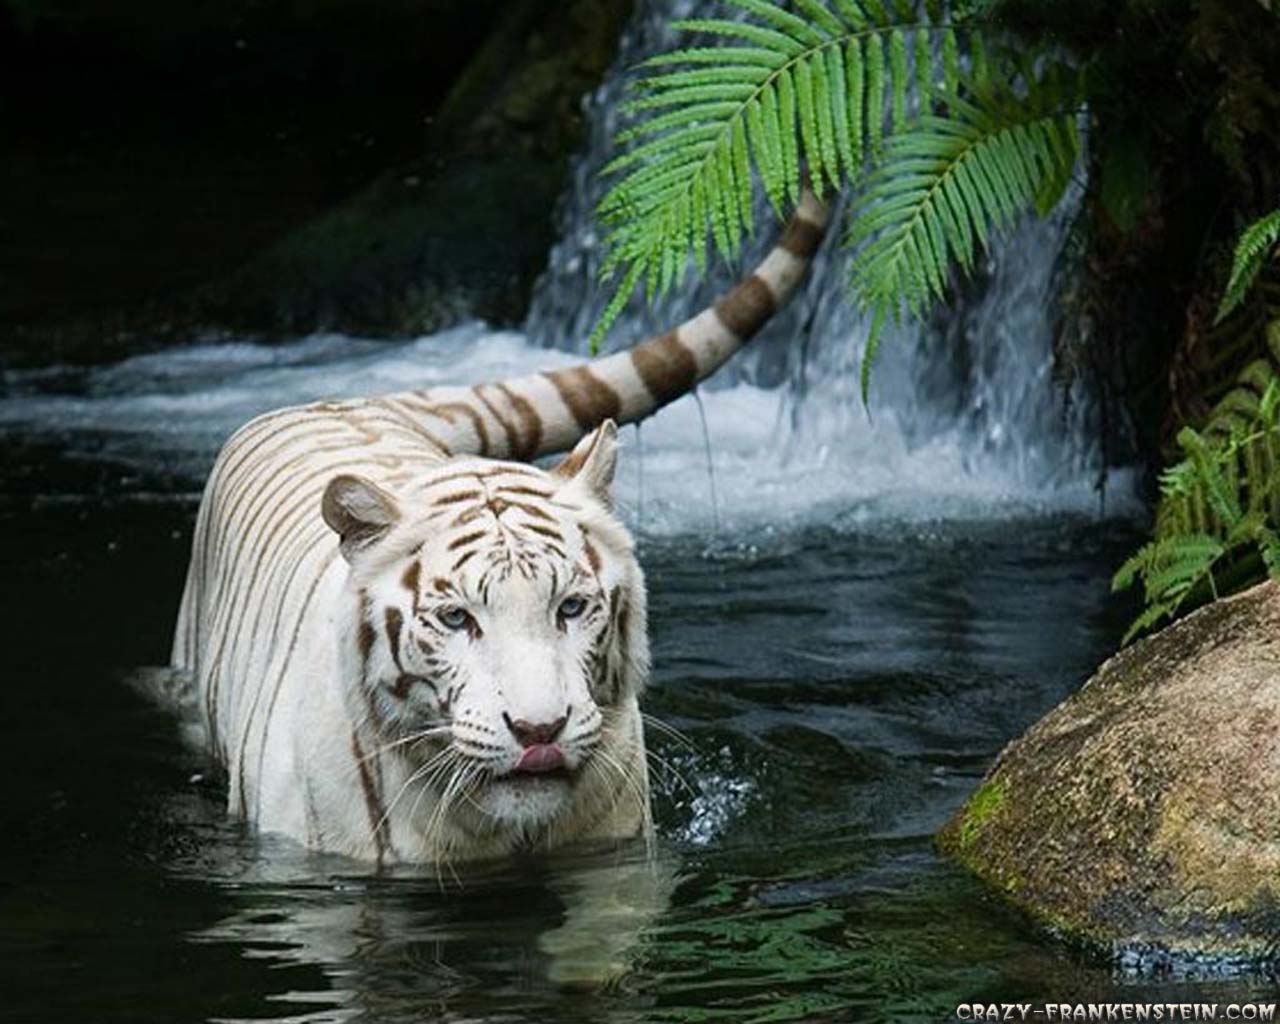 Drifting in My Dreams With a Wild White Tiger